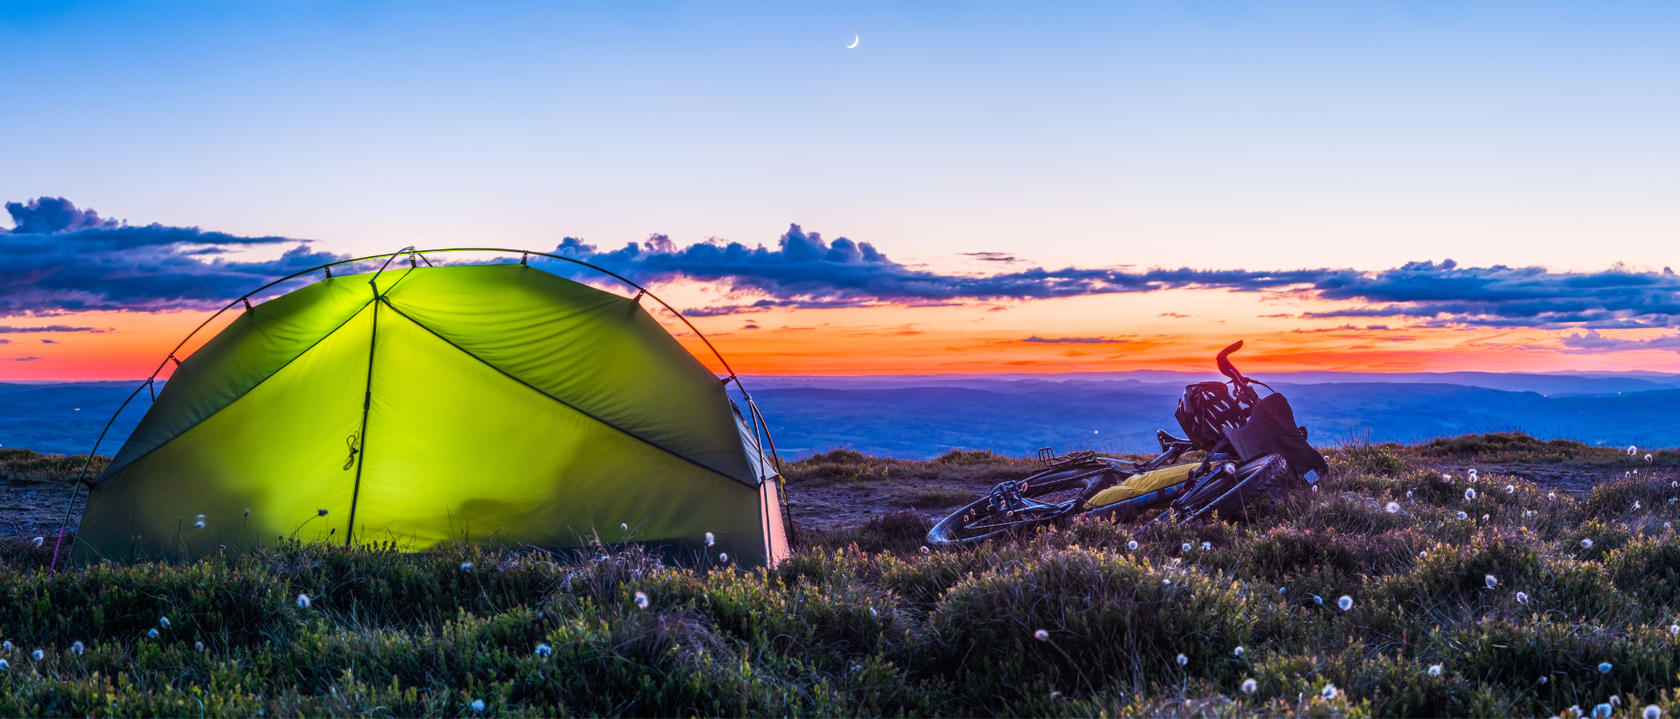 night time backpacking scene tent and bike with sunset